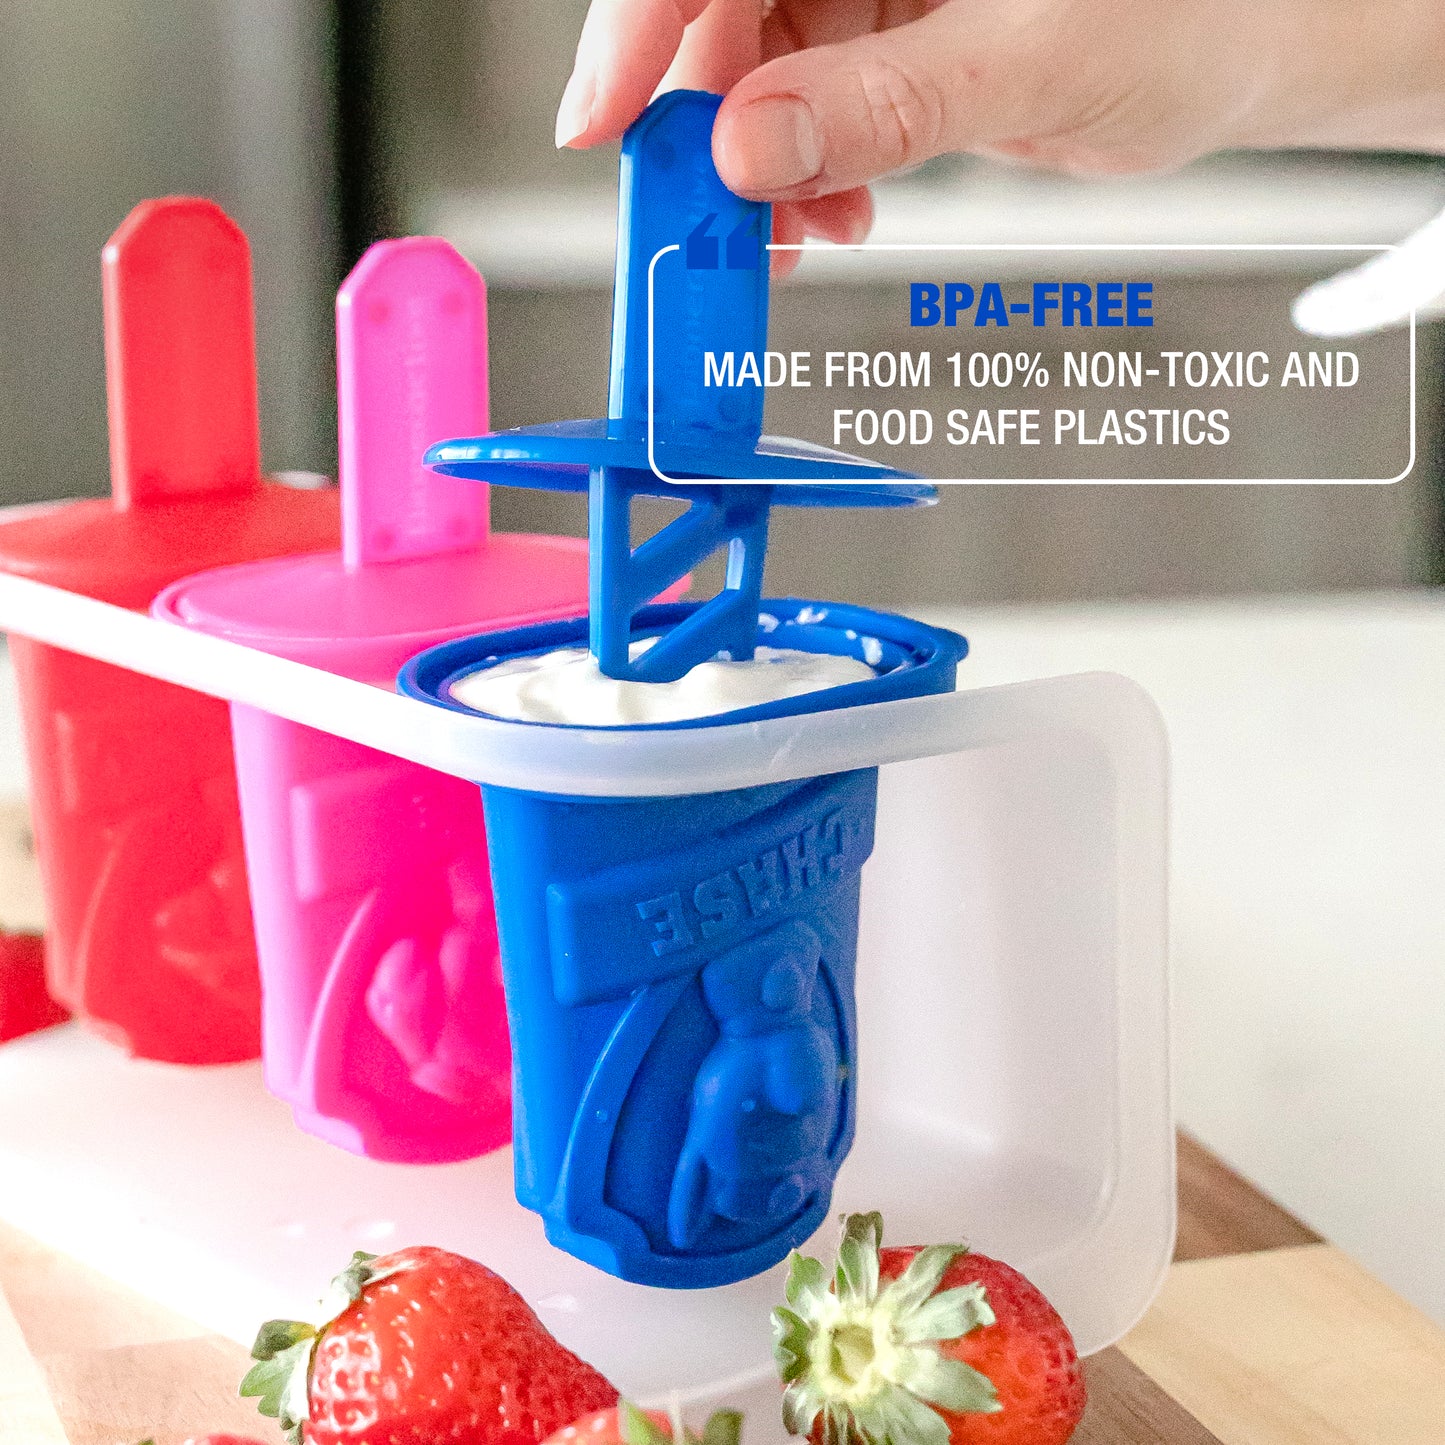 PAW Patrol<BR> Play Pops<BR> (3 Ice Pop Molds + Tray)